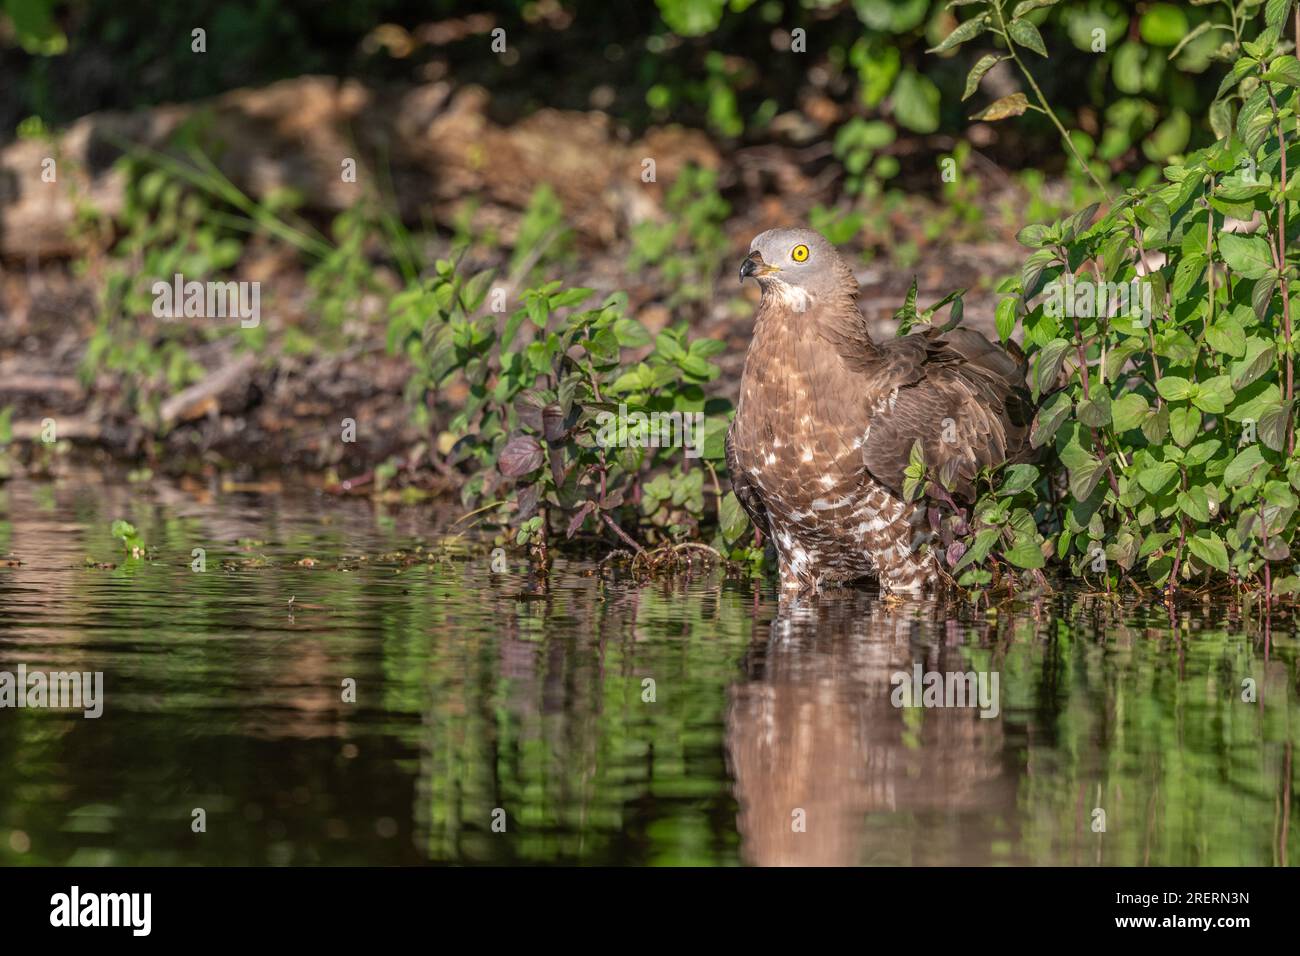 European Honey Buzzard (Pernis apivorus) coming to drink in a pond during a heat wave. Bas-Rhin, Collectivite europeenne d'Alsace,Grand Est, France. Stock Photo